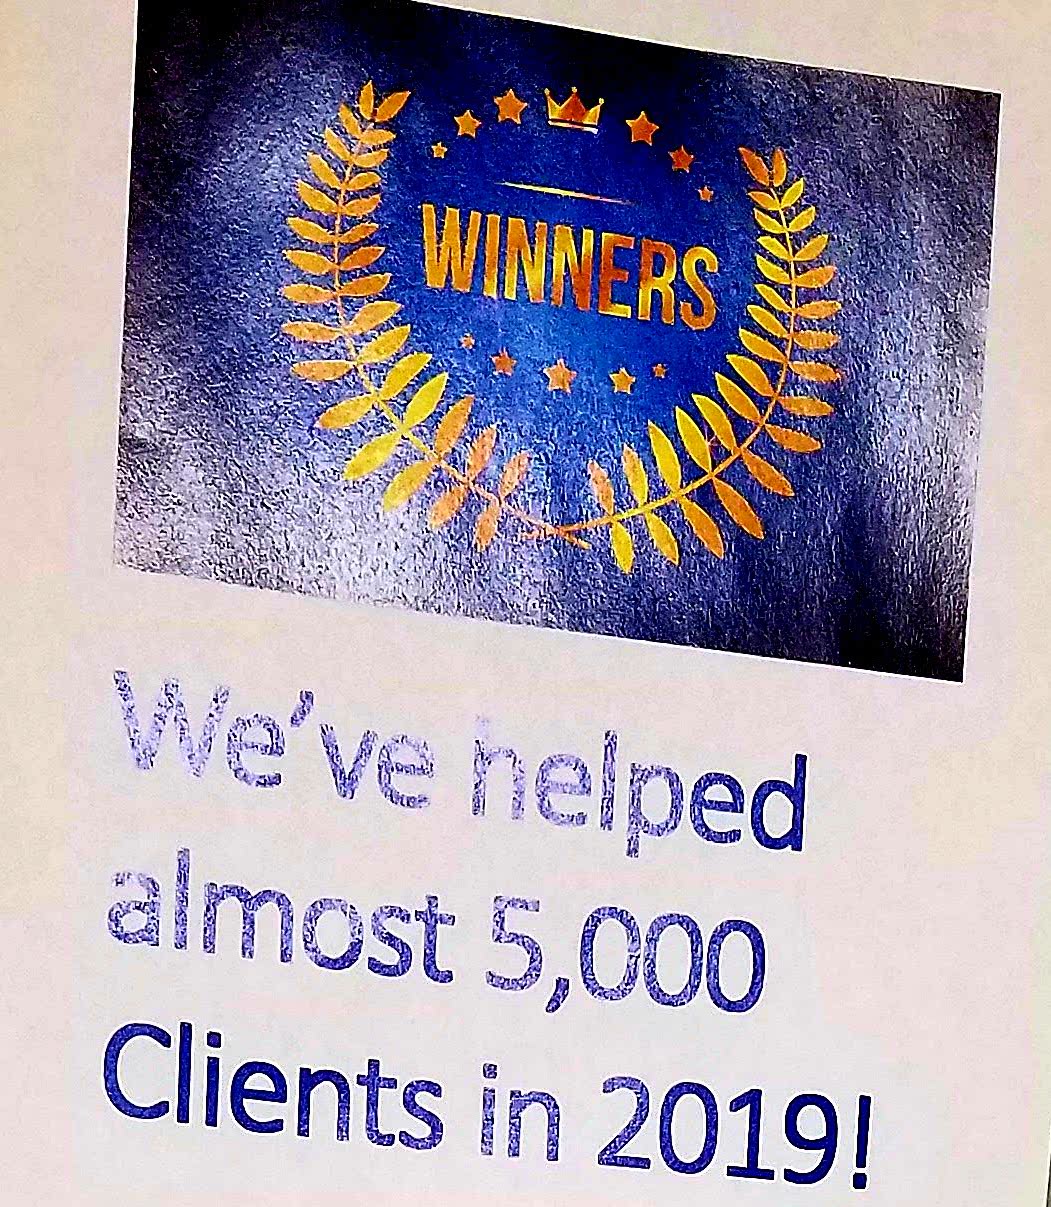 We've helped almost 5000 clients in 2019!